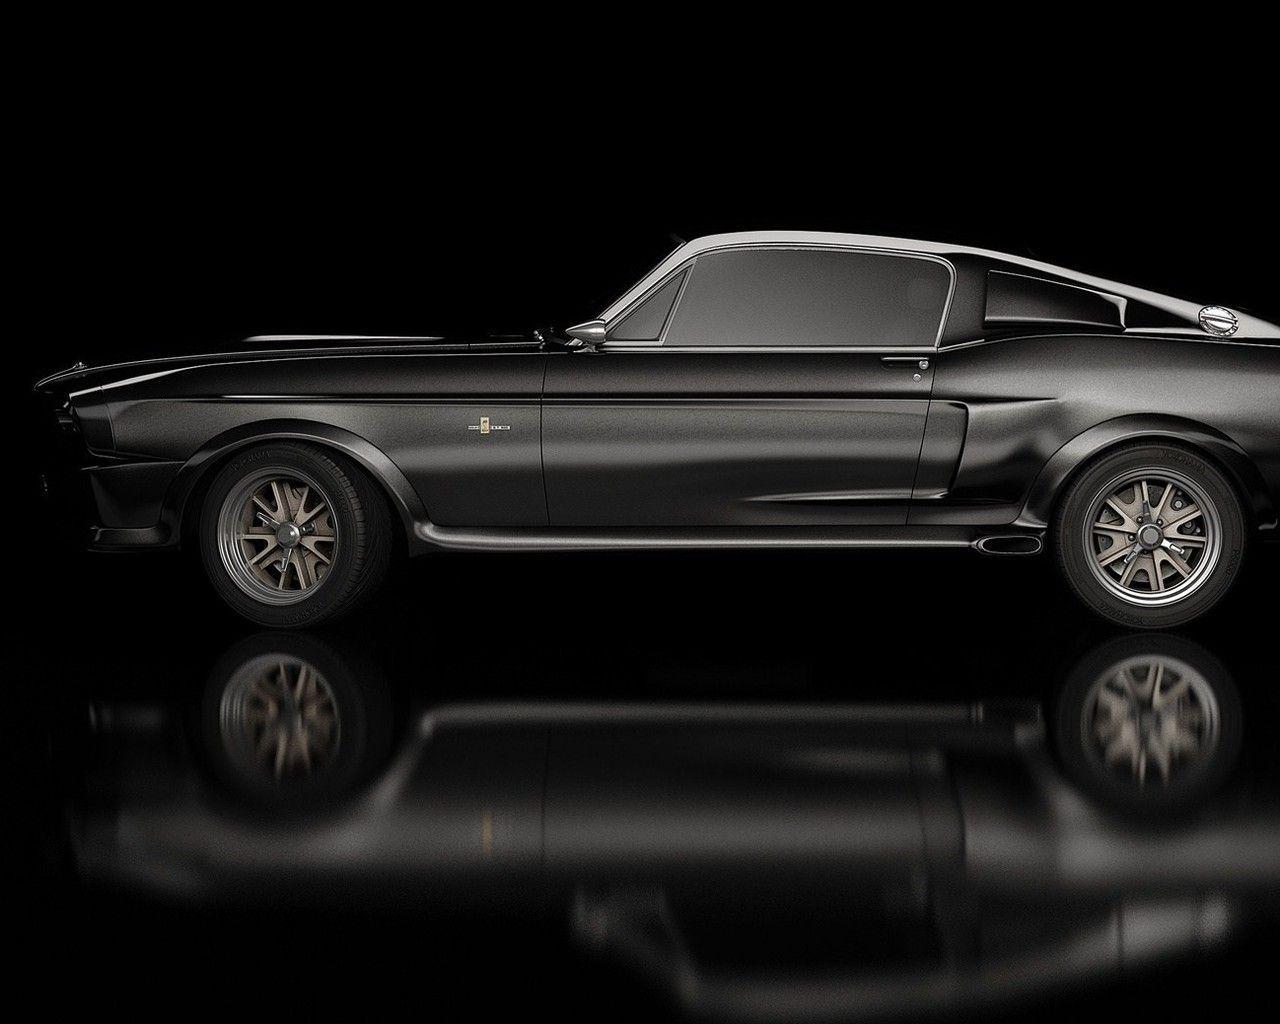 Ford Mustang Shelby Gt500 Eleanor Wallpaper 1600x900 Ford Mustang